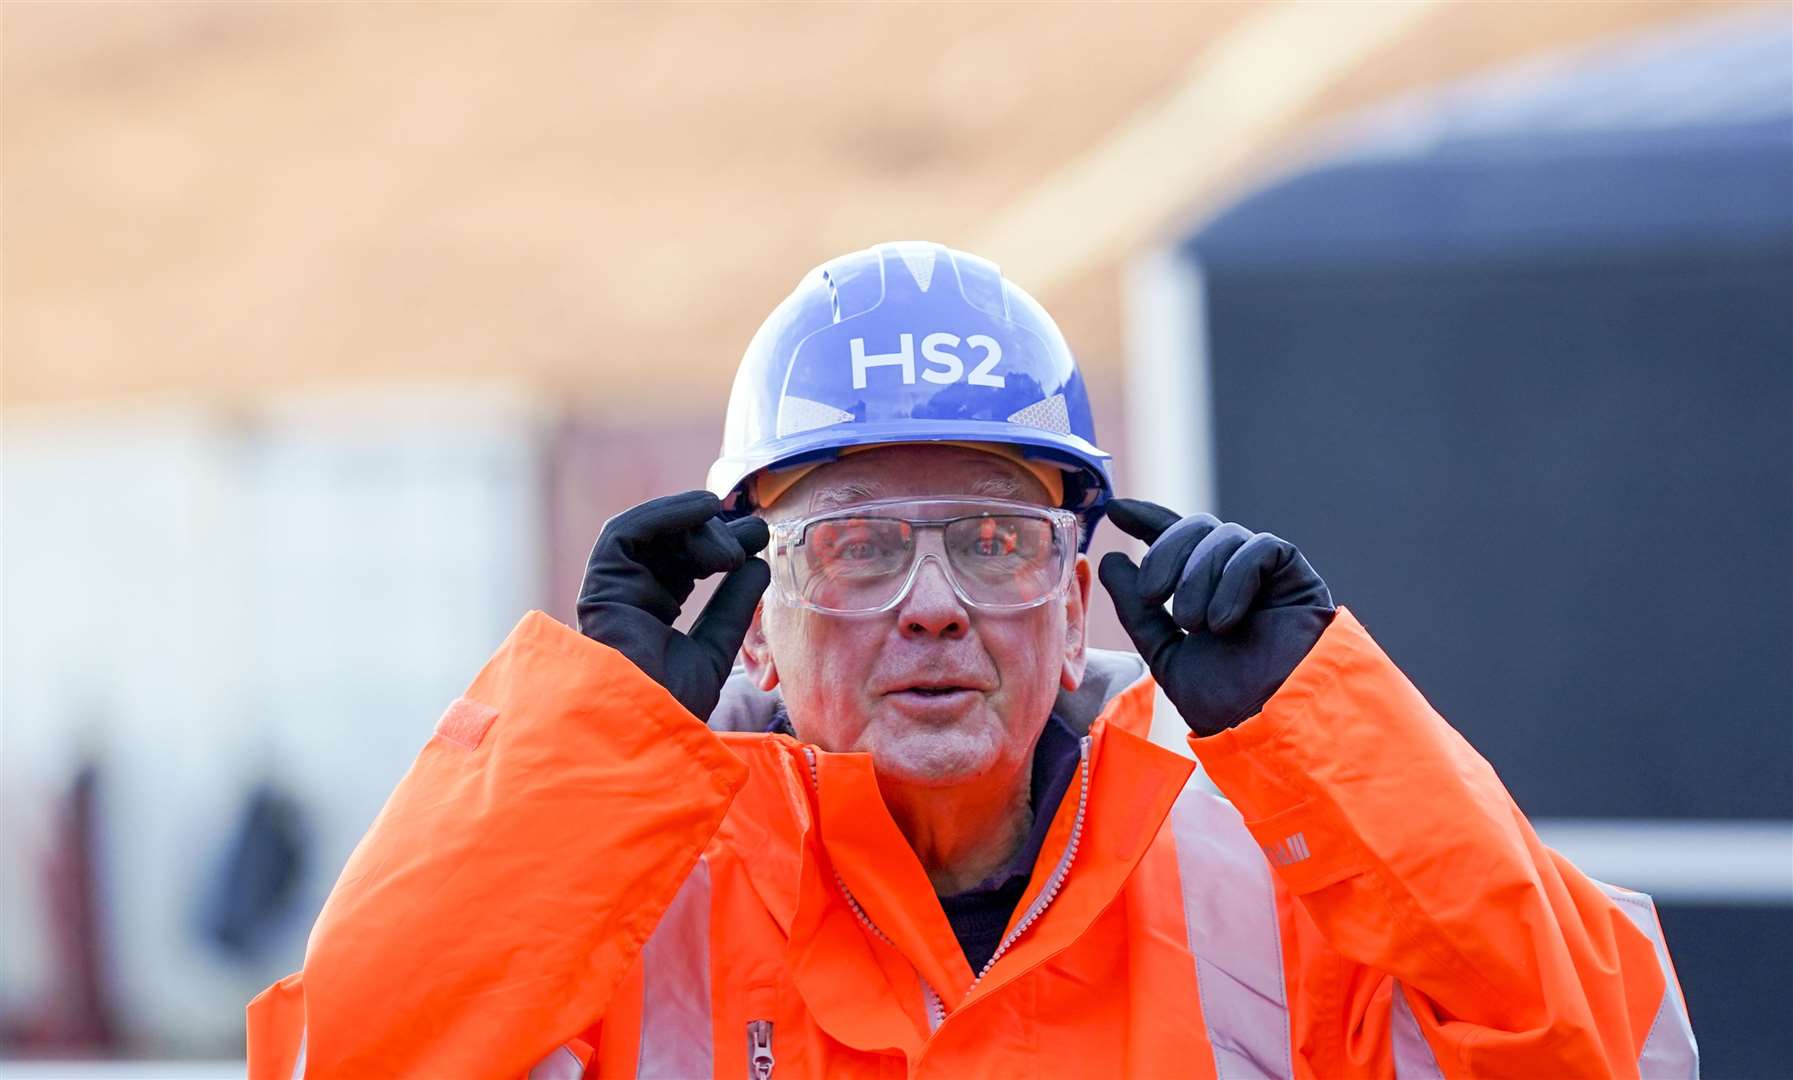 Pete Waterman visited the construction site in Warwickshire (Steve Parsons/PA)